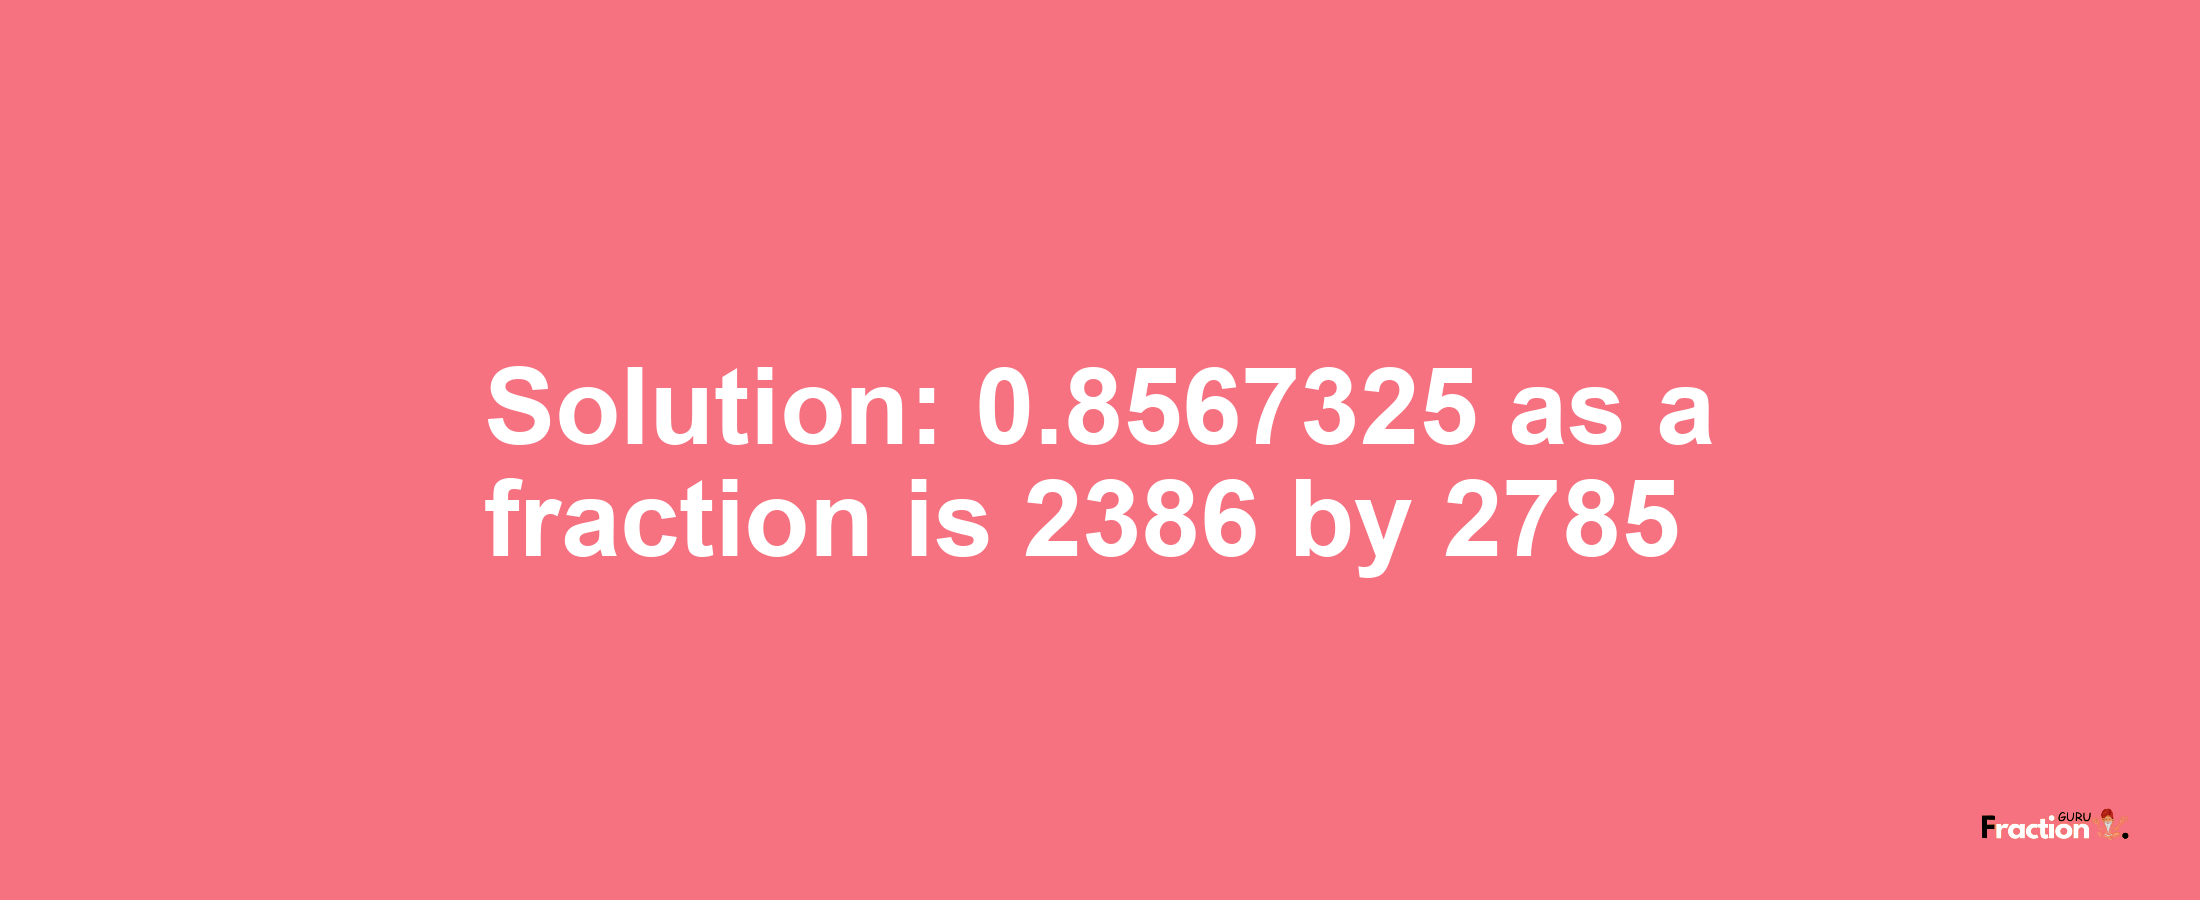 Solution:0.8567325 as a fraction is 2386/2785